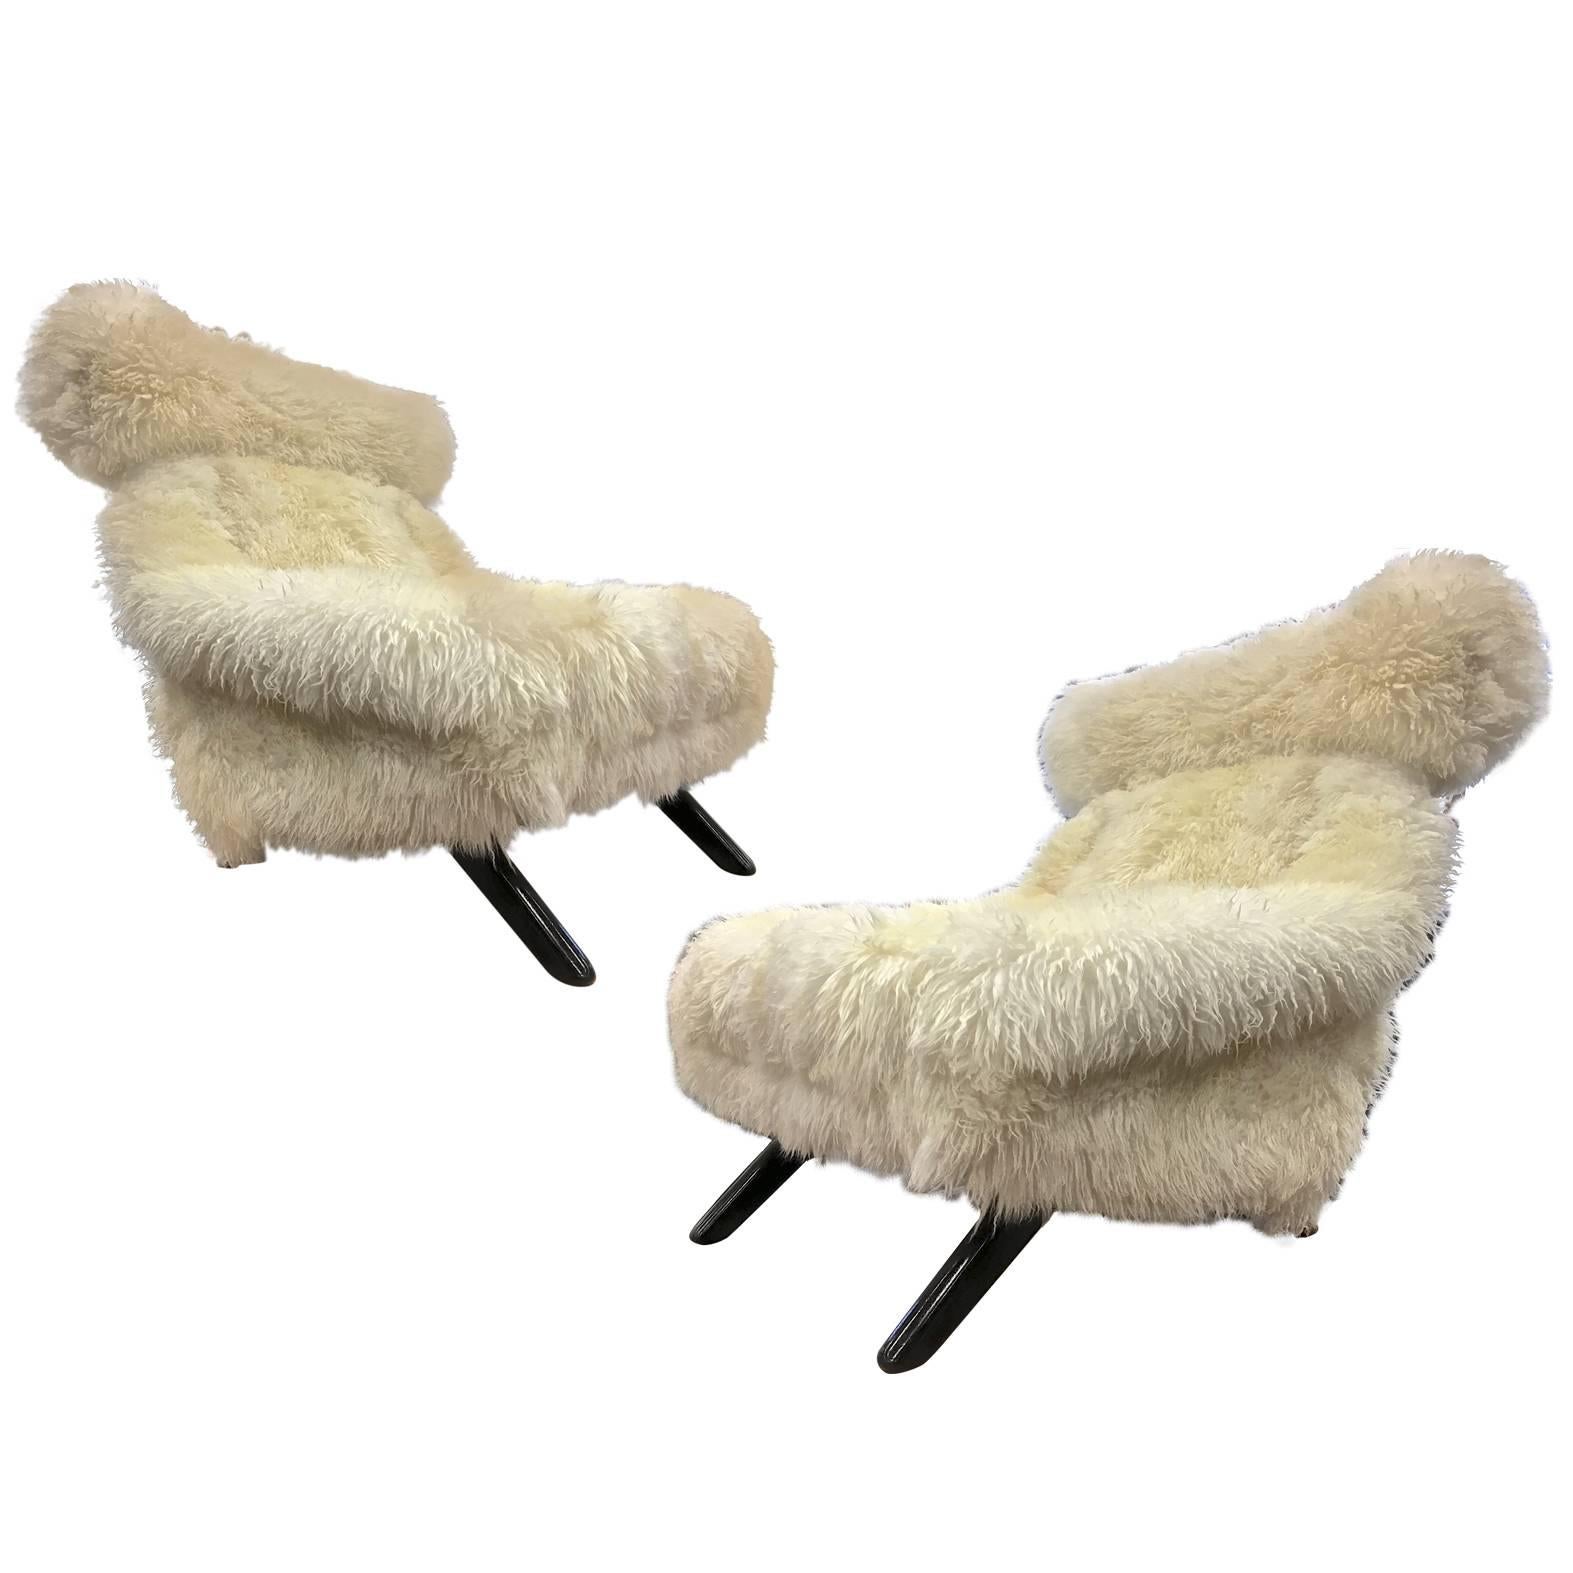 Illum Wikkelso Spectacular Hammer Lounge Chair Covered in Natural Sheepskin Fur For Sale